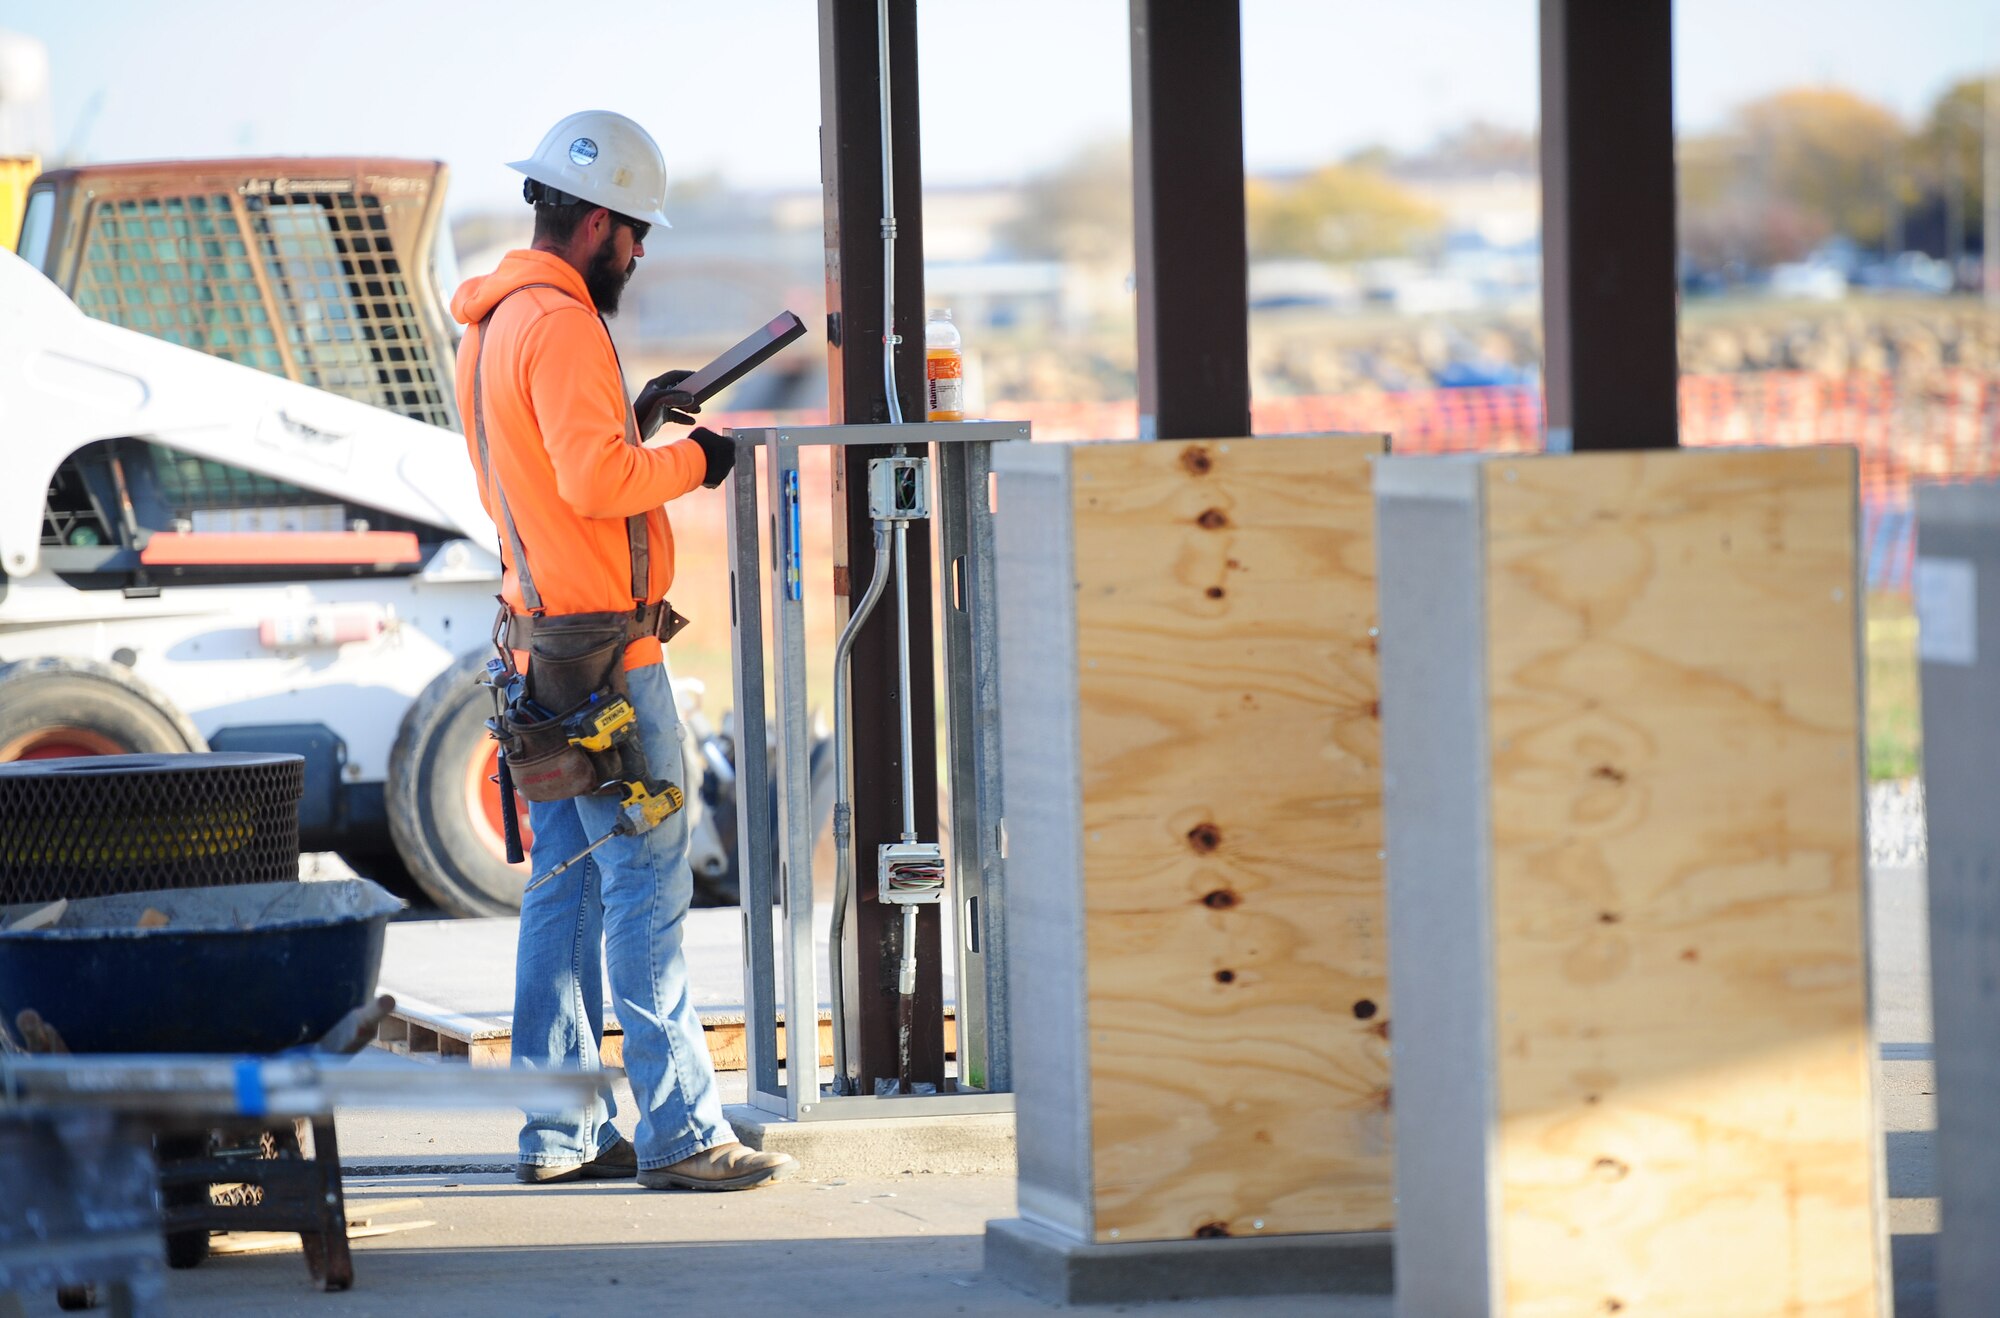 Dustin Rodgers, a construction carpenter, frames a pavilion column Oct. 21, 2015, at Whiteman Air Force Base, Mo. The renovation of the pavilion and surrounding structures includes upgrades to the existing shelters and replacing the stage with fabric canopy structures. The pavilion and stage area is scheduled to be closed until mid-December 2015. (U.S. Air Force photo by Airman 1st Class Jazmin Smith/Released)
